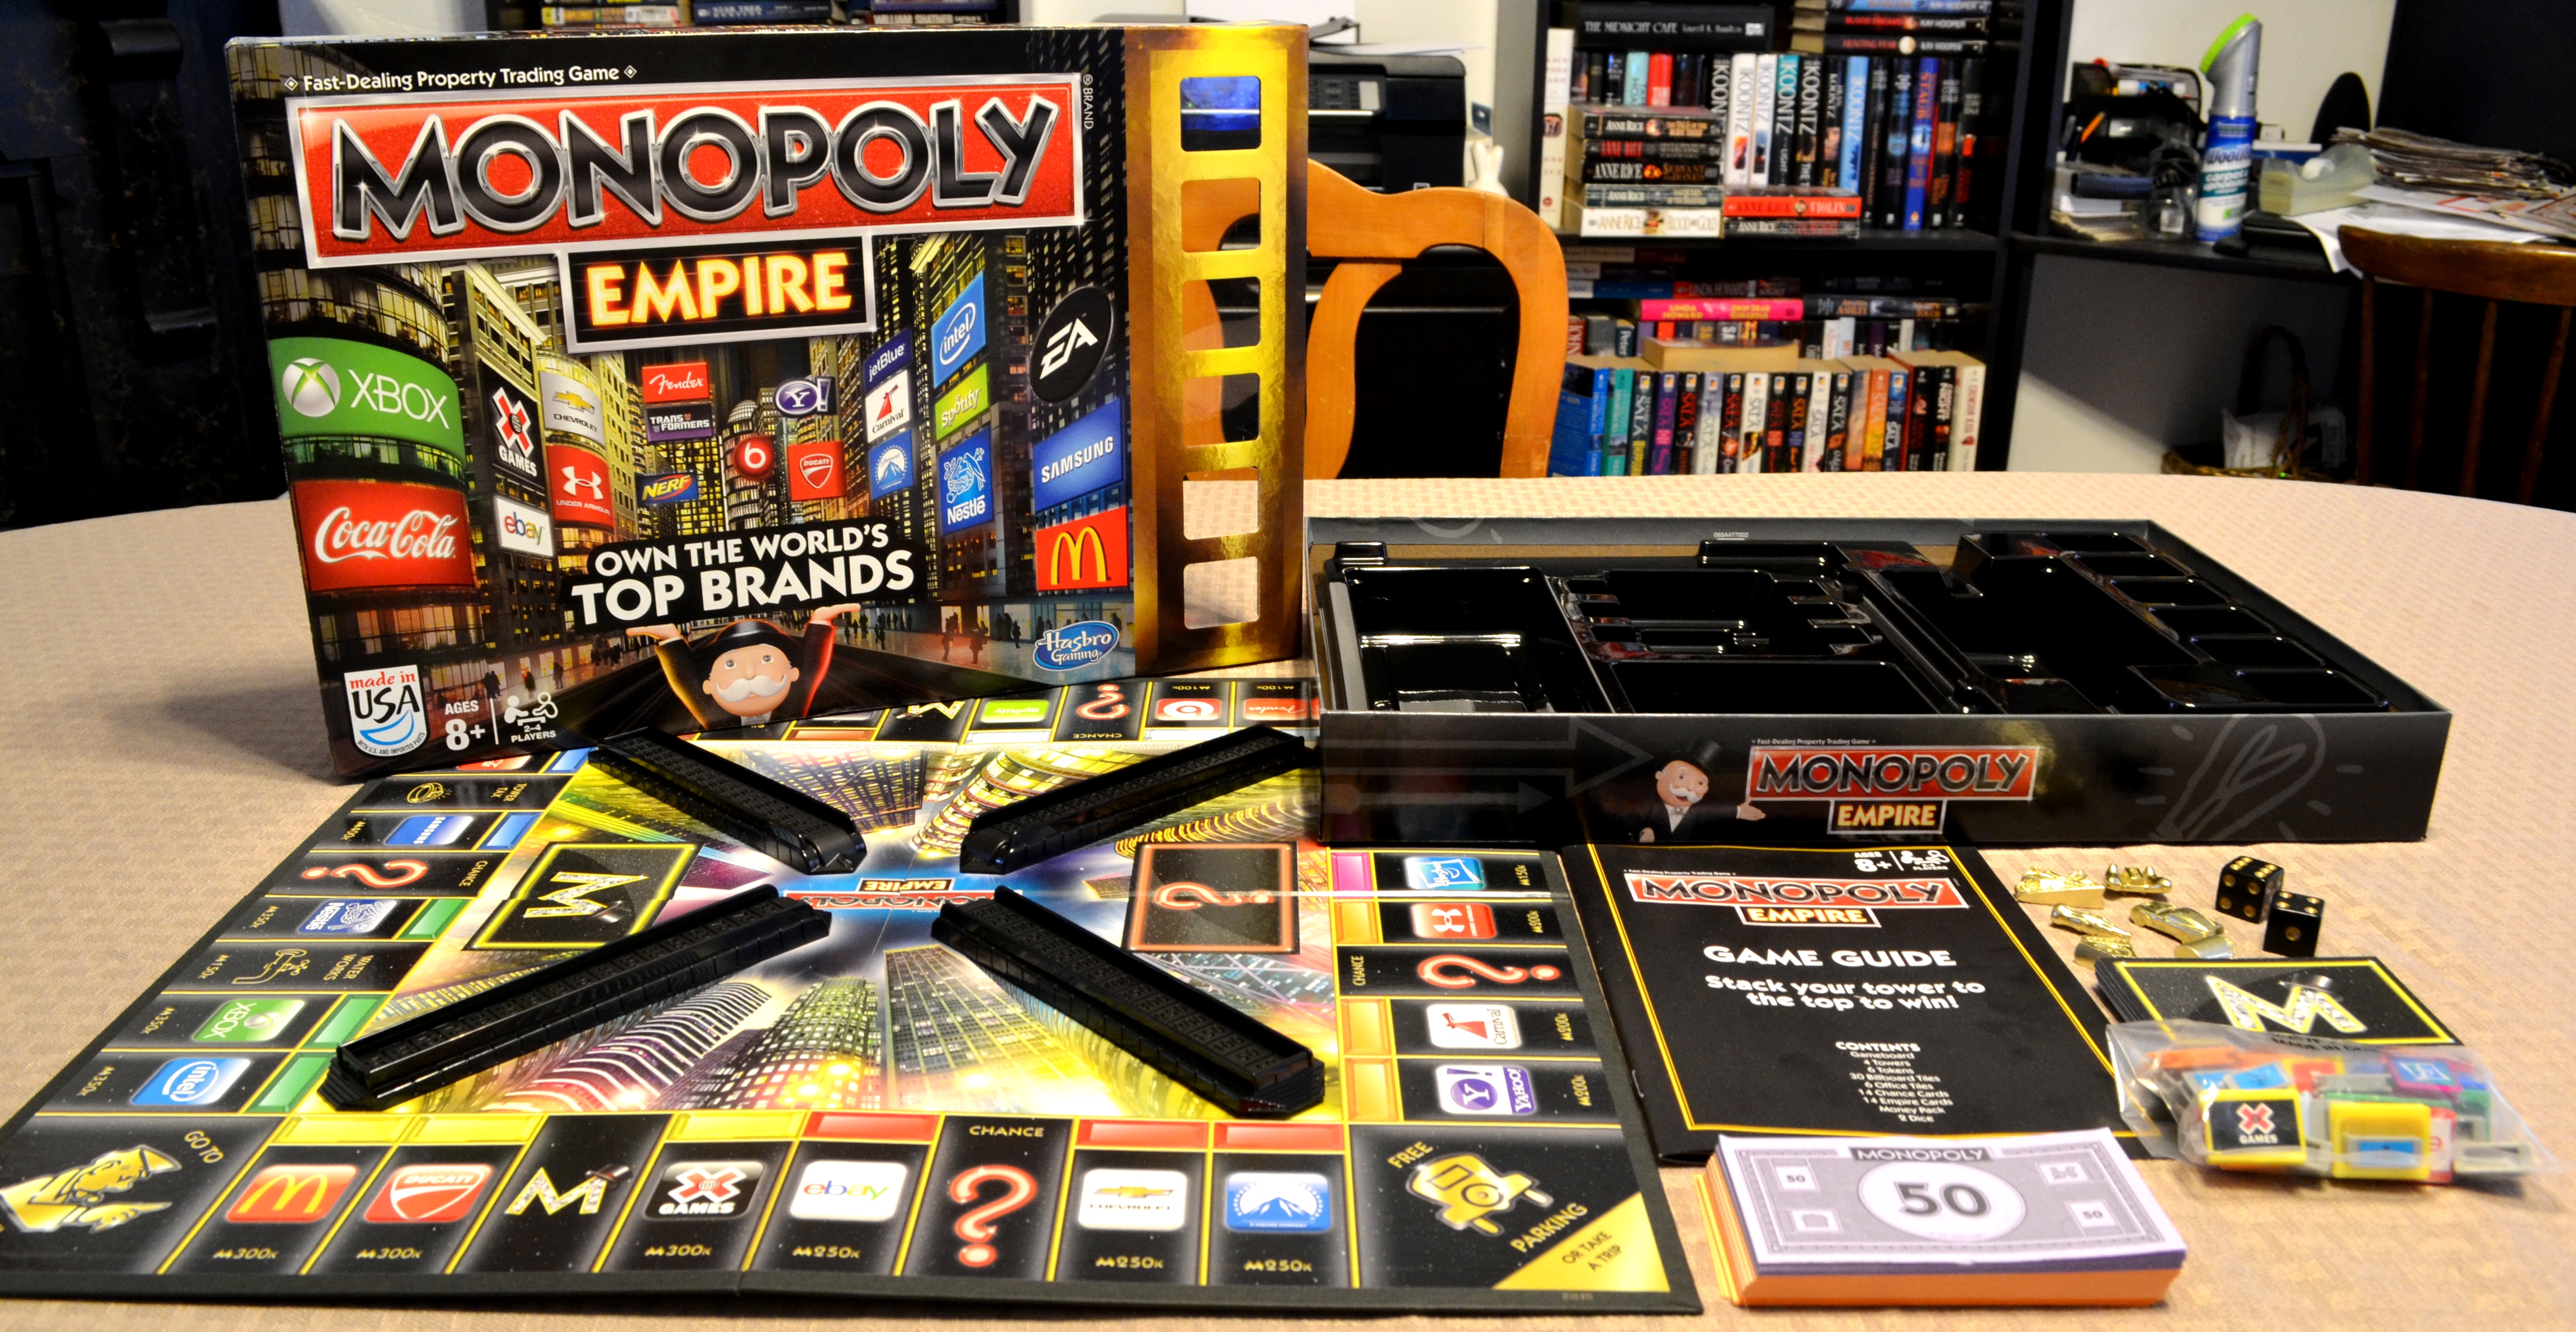 monopoly empire rules utilities